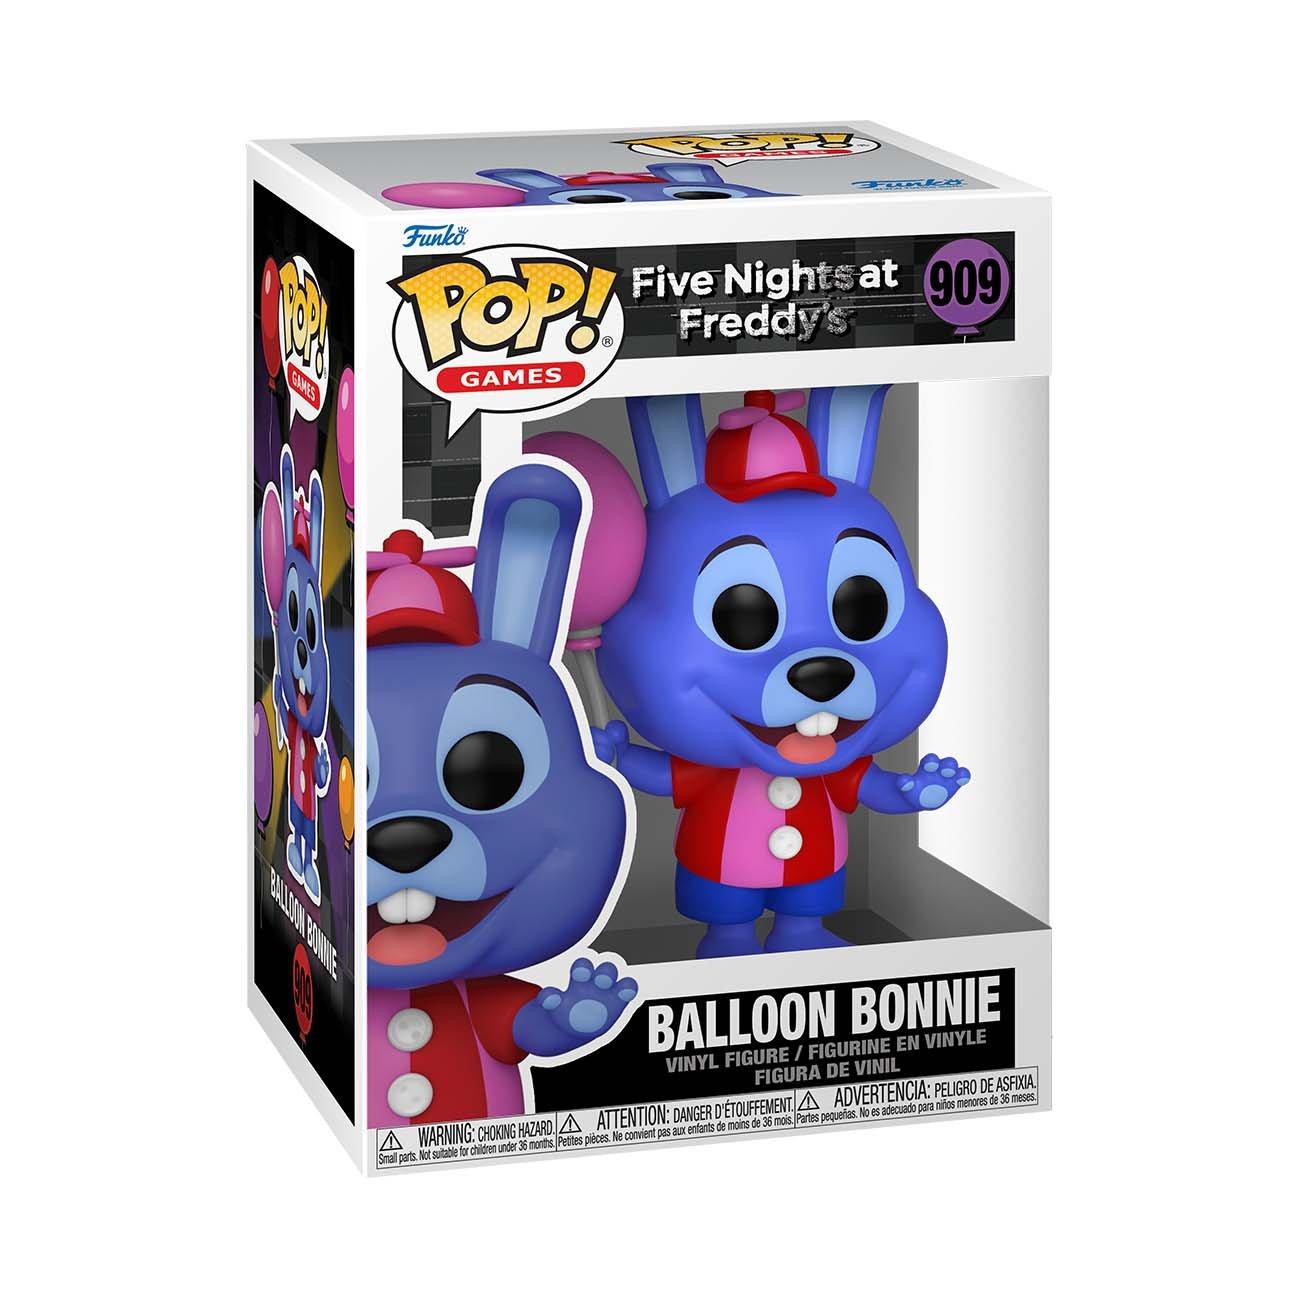  Funko Bitty Pop!: Five Nights at Freddy's Mini Collectible Toys  - Freddy, Bonnie, Ballon Boy & Mystery Chase Figure (Styles May Vary)  4-Pack : Toys & Games